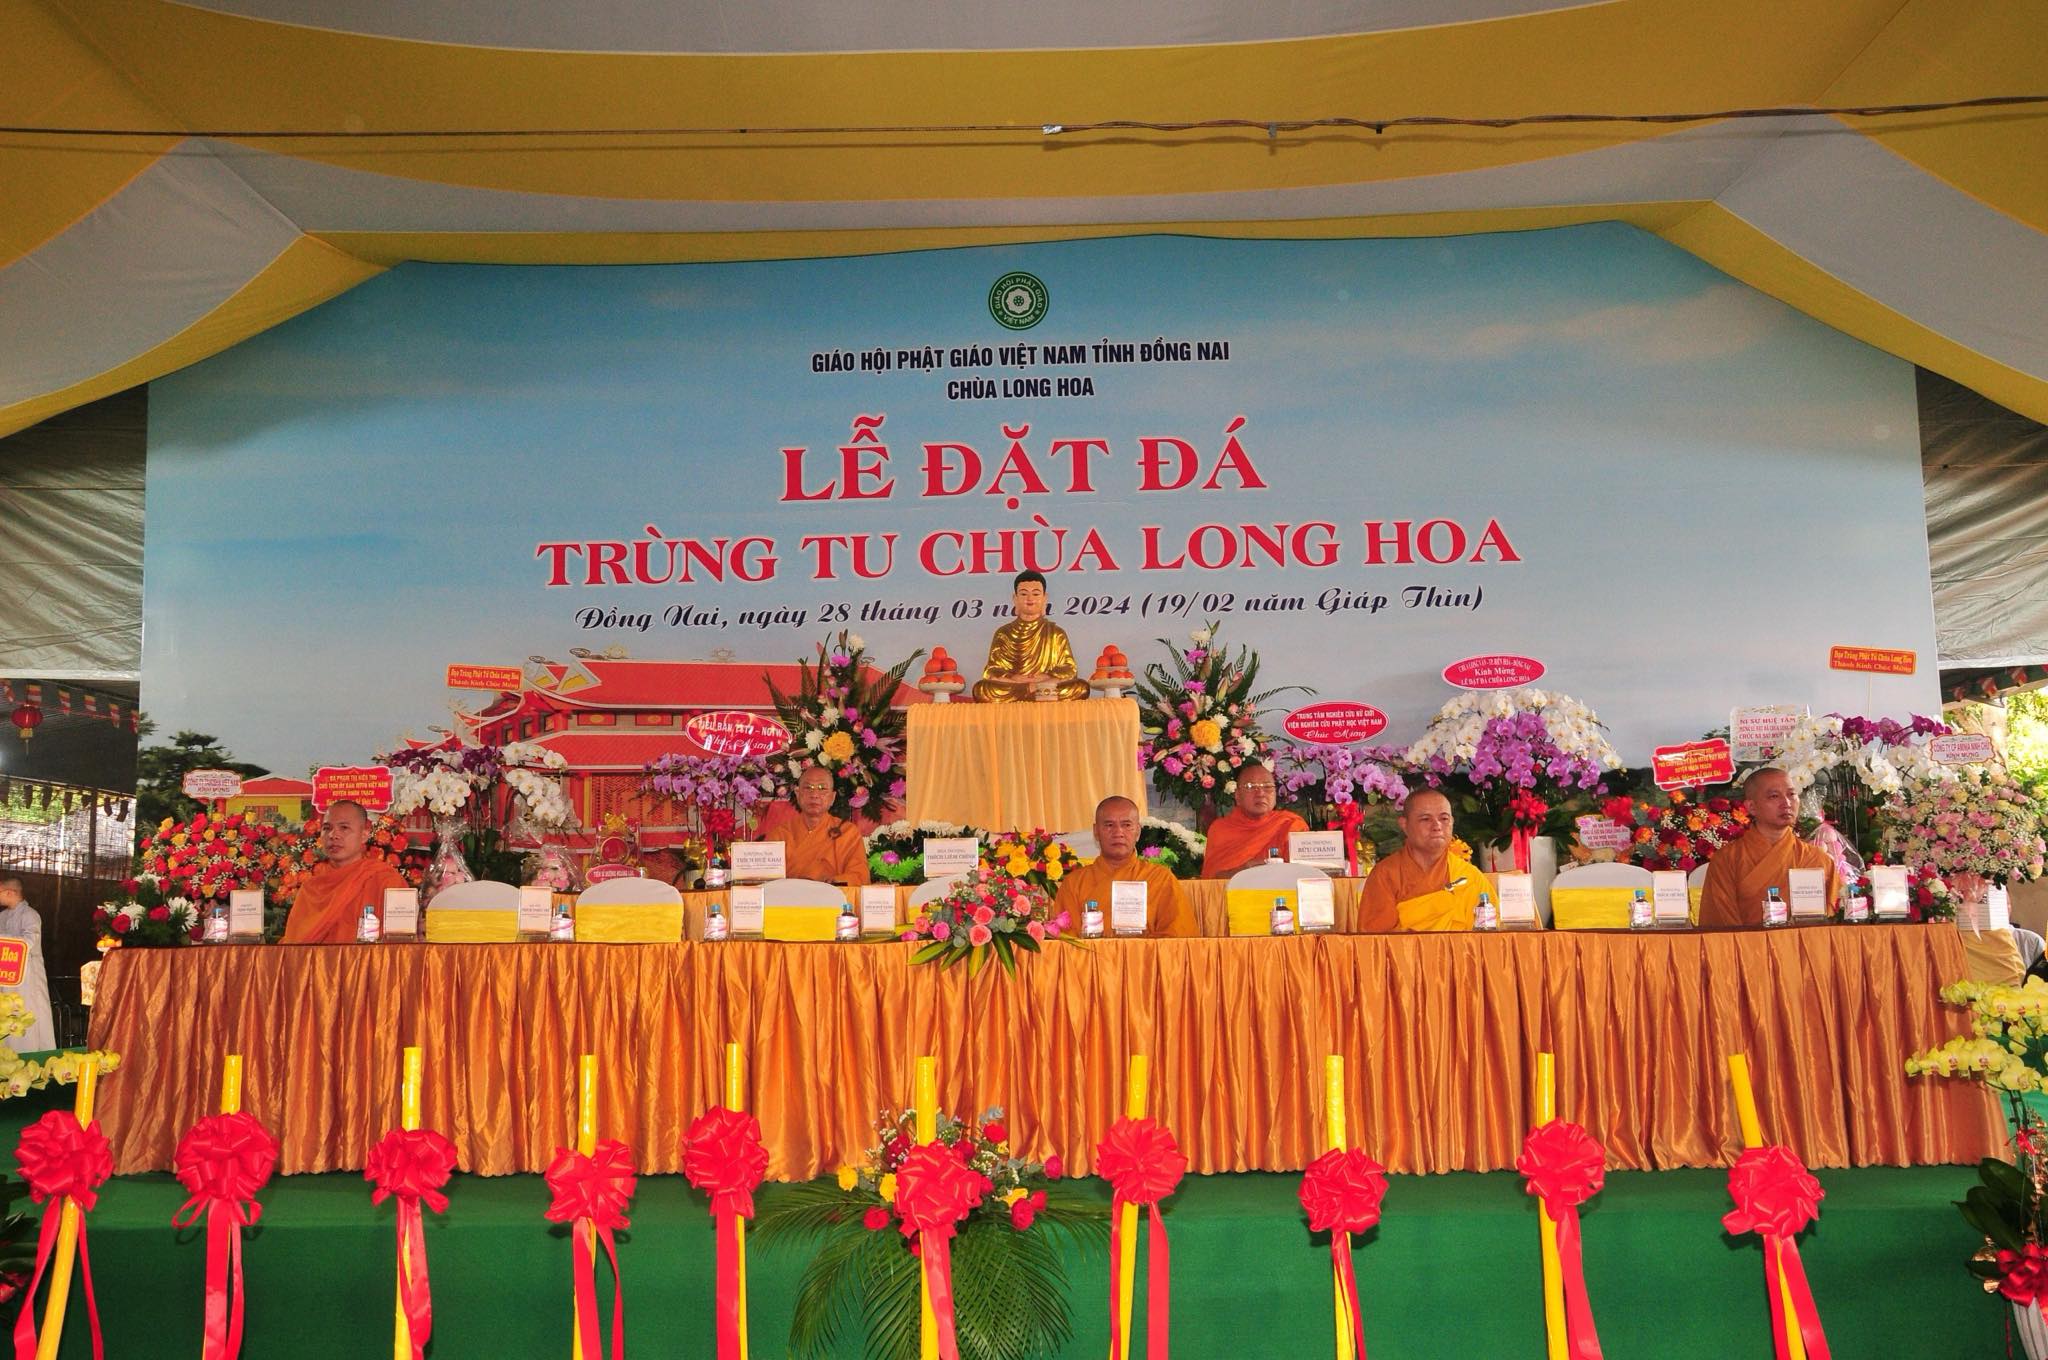 Buddhist monks attend a foundation stone laying ceremony for the restoration of Long Hoa Pagoda in Dong Nai Province, southern Vietnam on March 28, 2024. Photo: Supplied